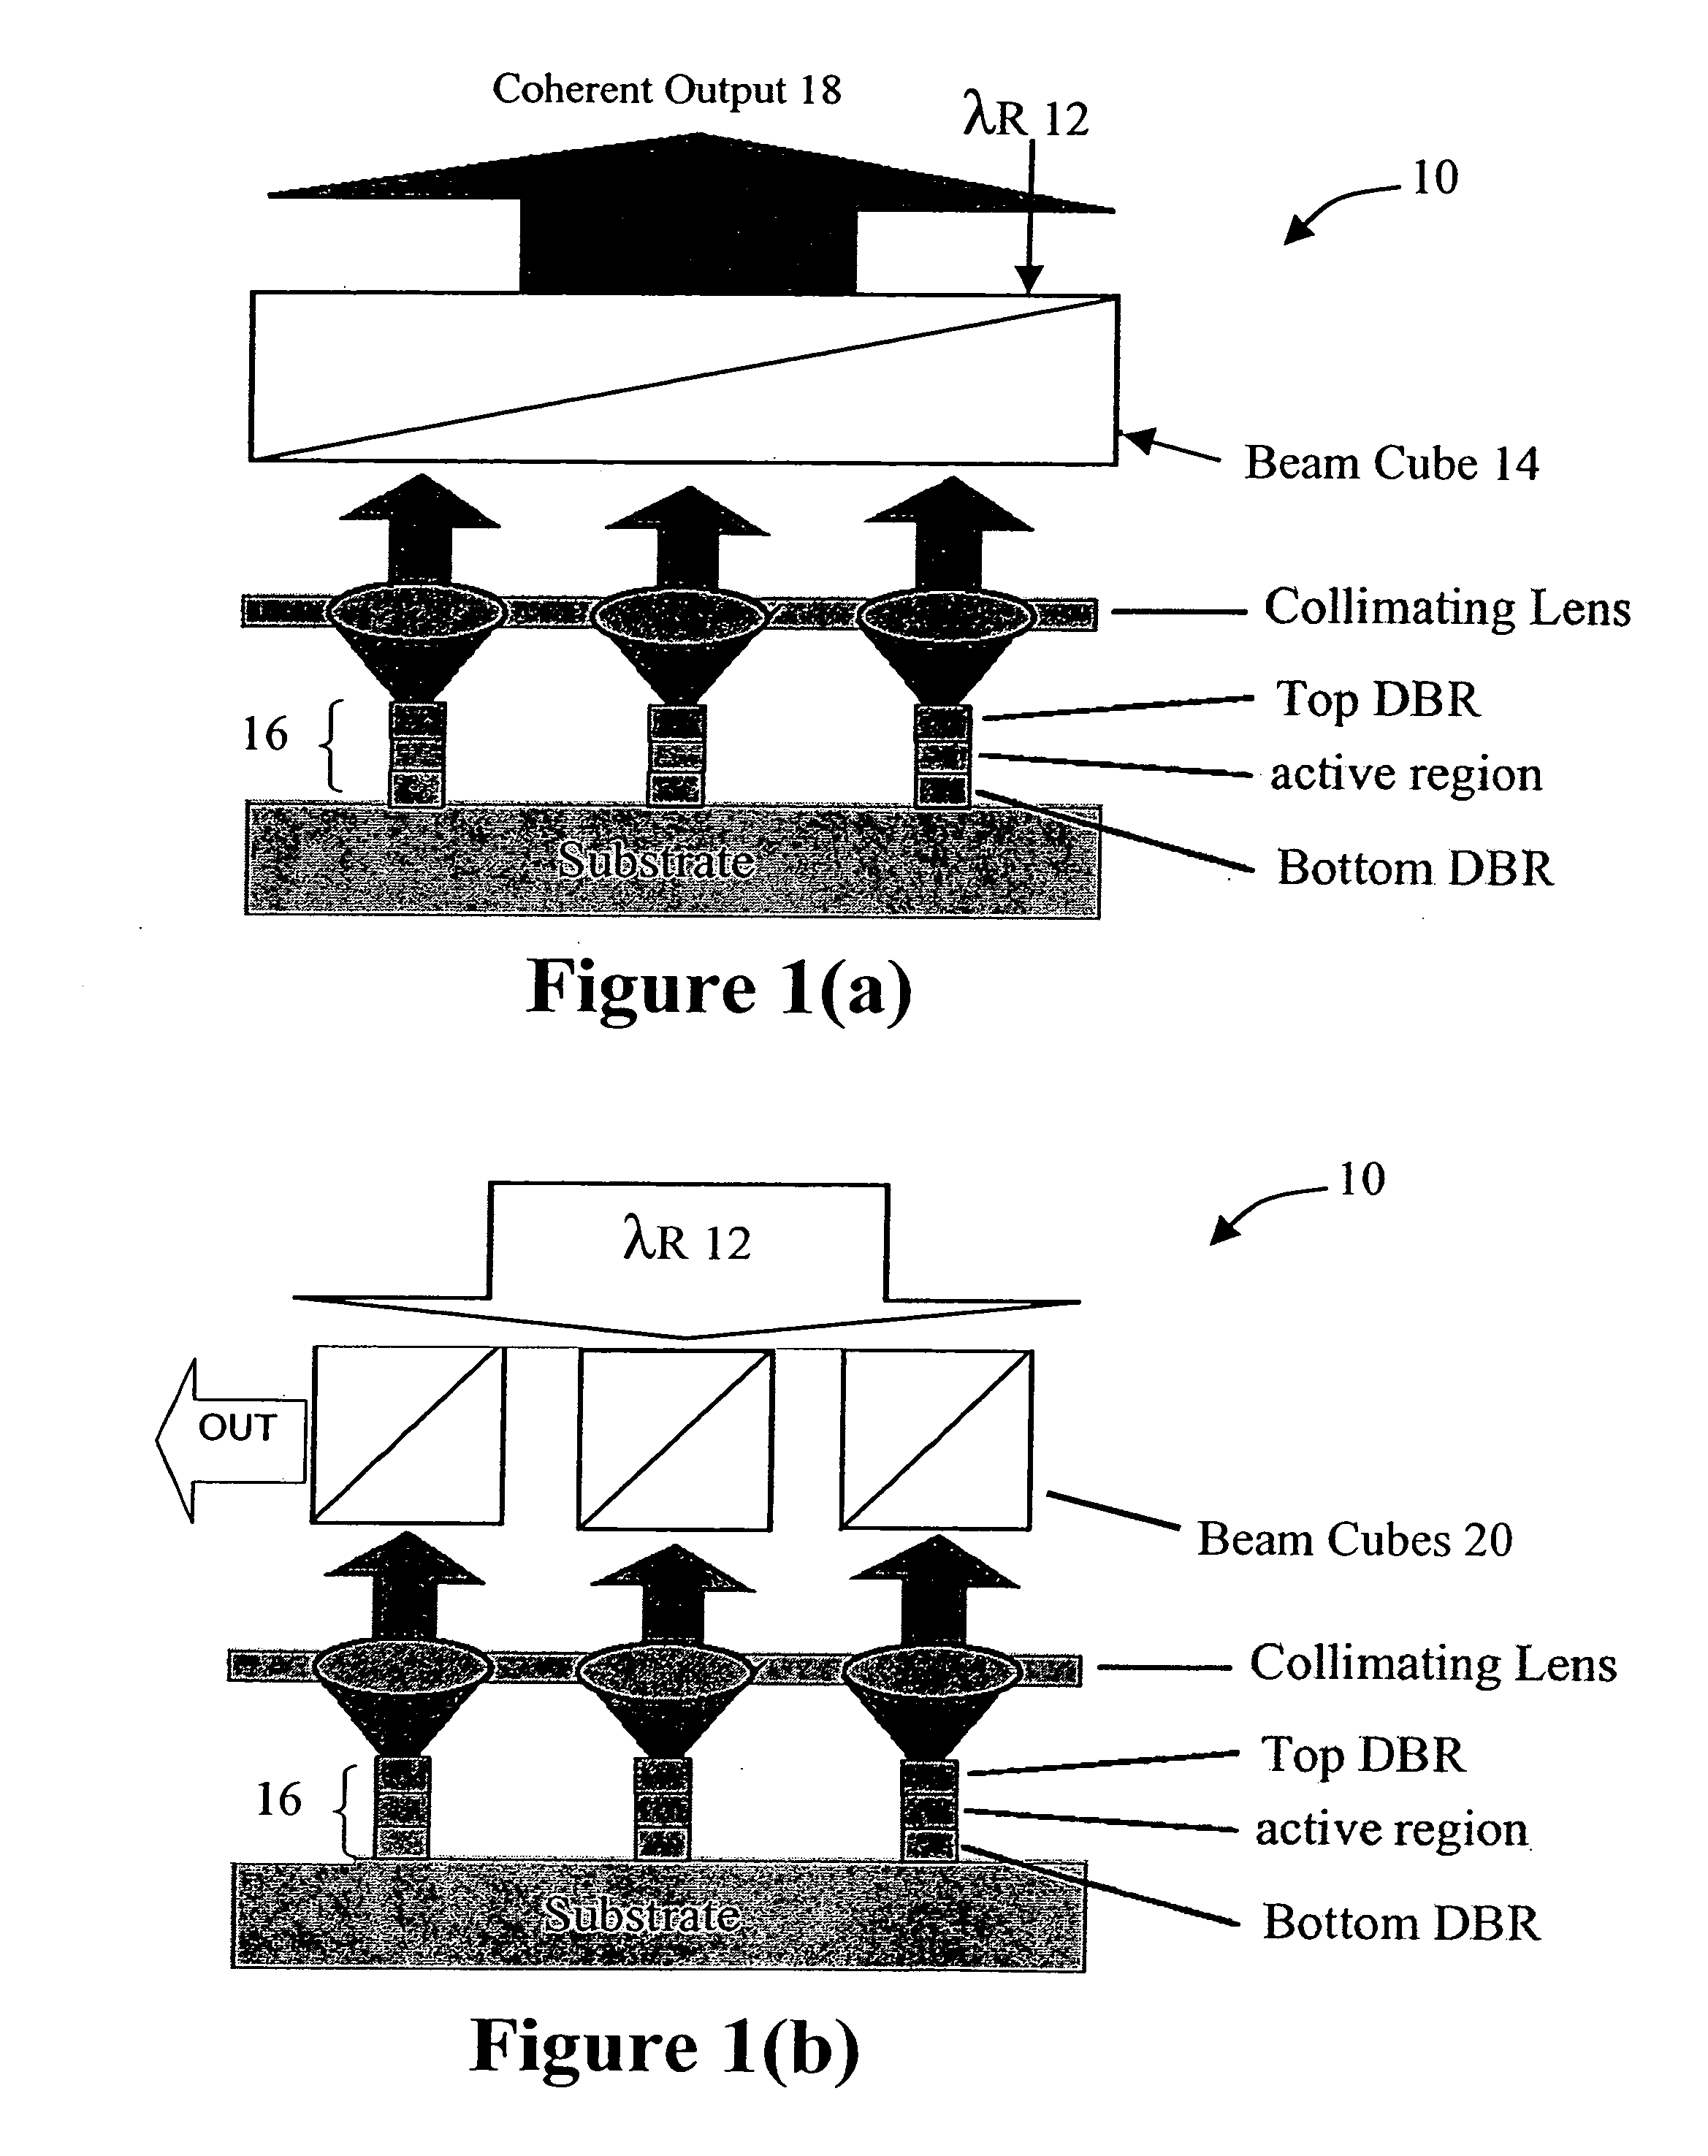 High-power coherent arrays of vertical cavity surface emitting lasers